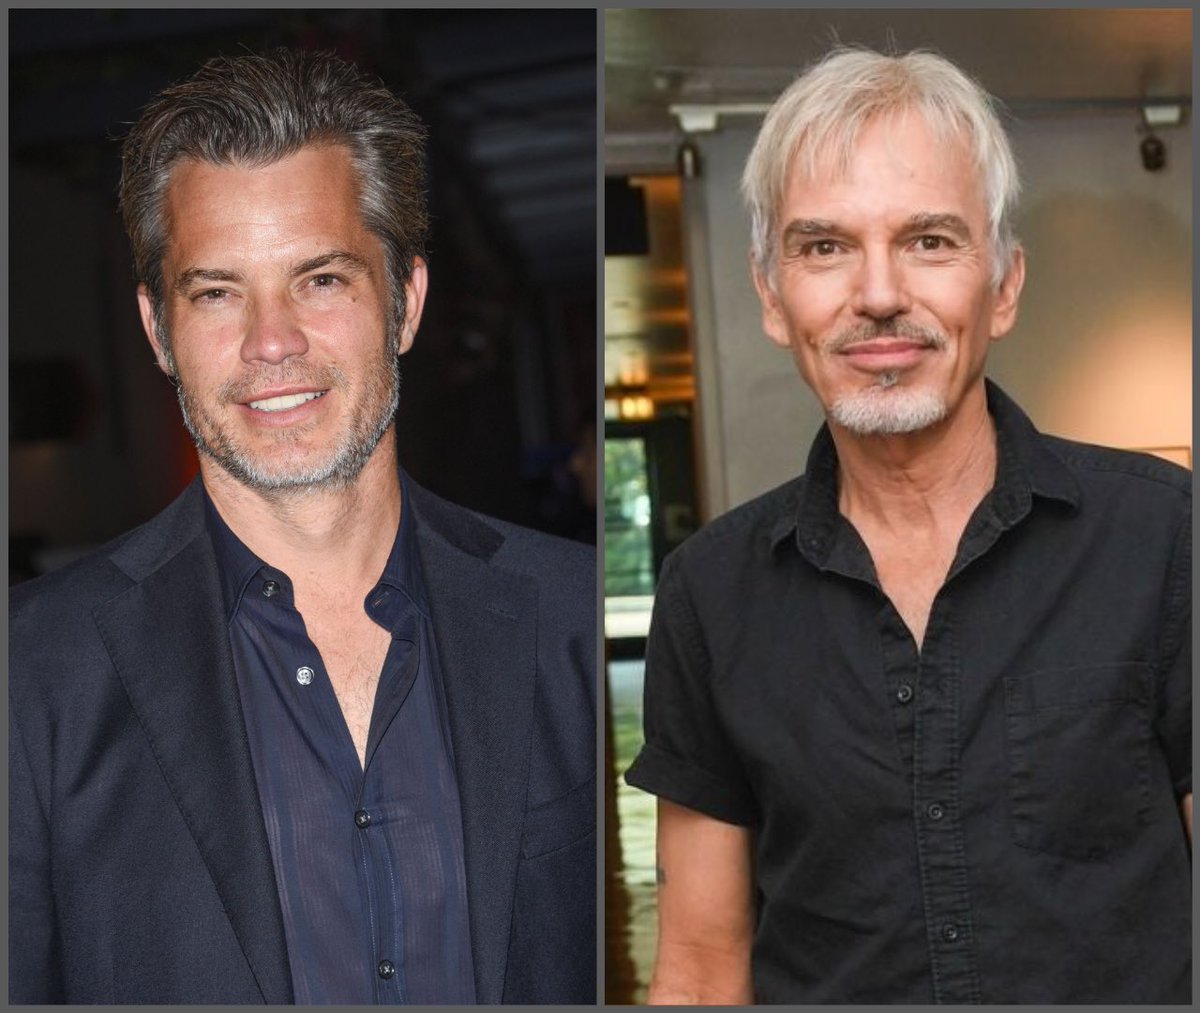 I want to see these two in a series together. #tv #screenwriting #timothyolyphant #billybobthornton #movies #film #filmtwitter #tvseries